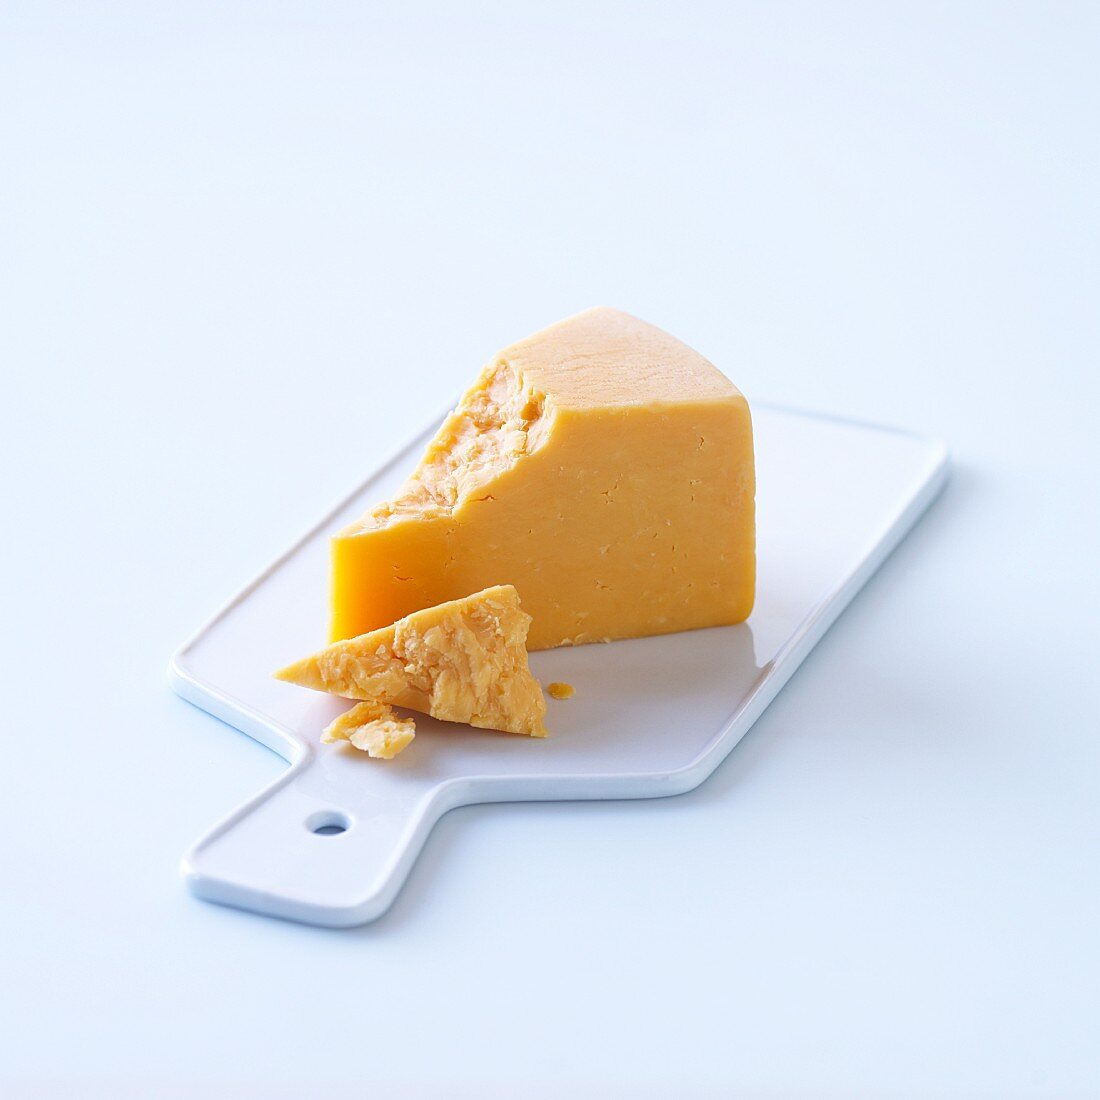 A slice of hard cheese on a plastic board